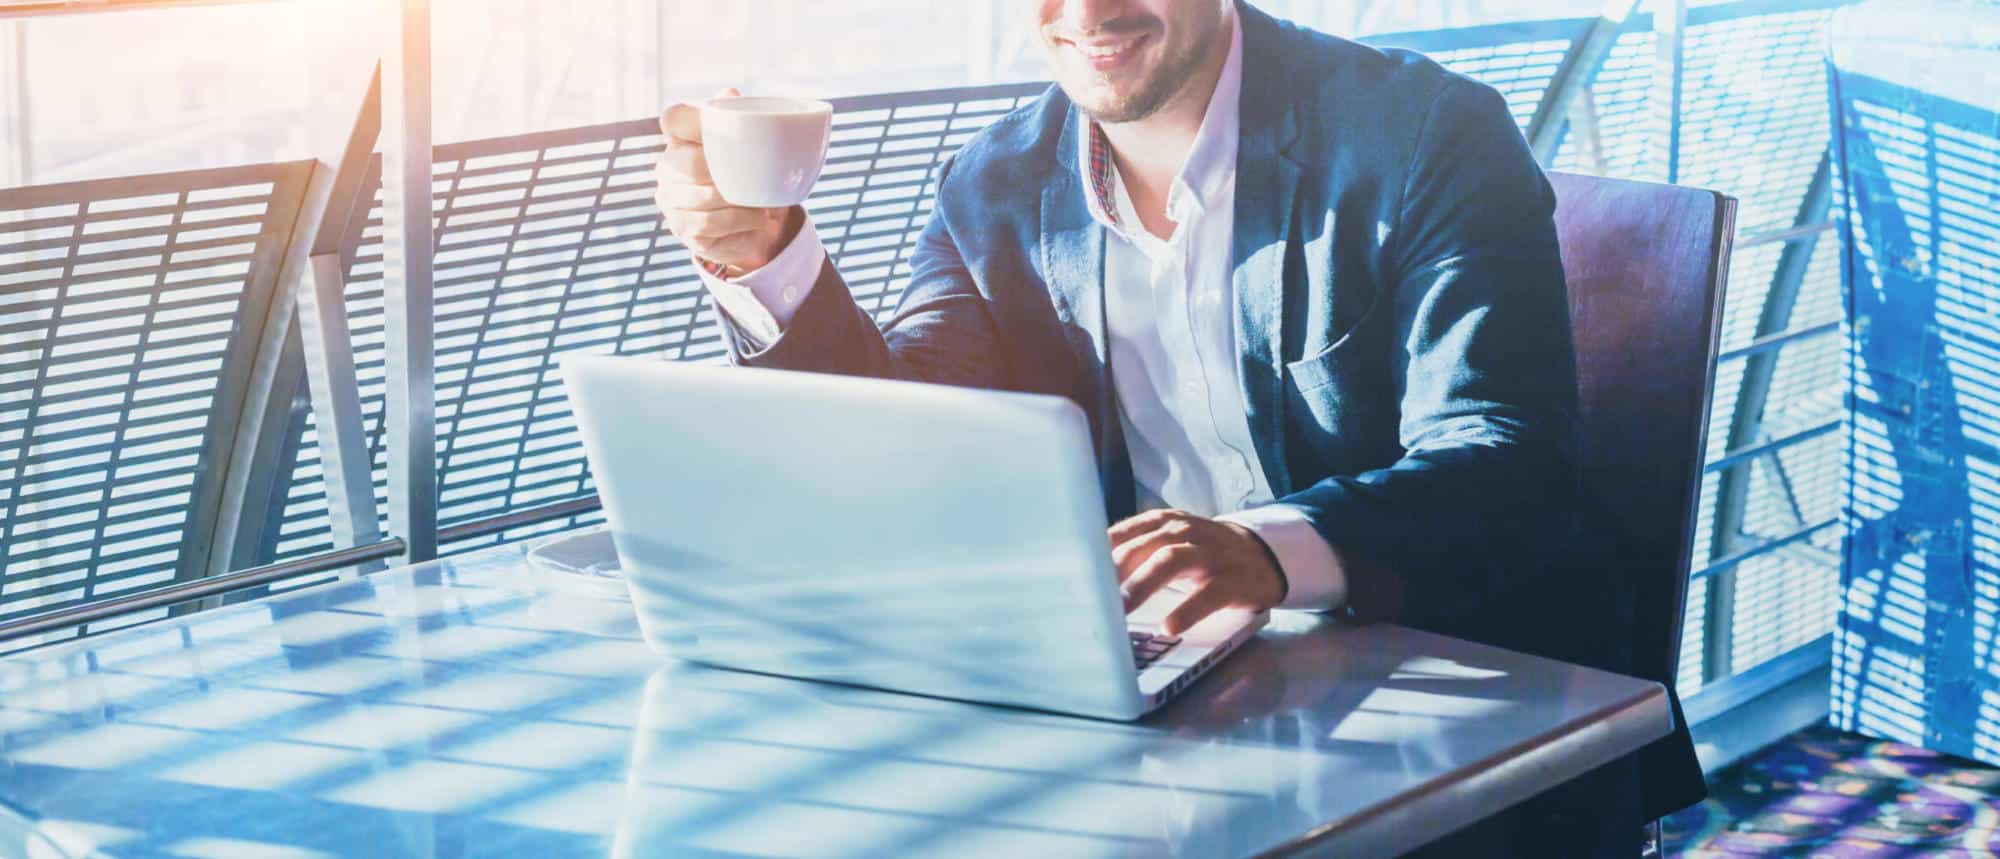 businessman working on computer, drinking coffee and smiling, abstract  business banner background with place for text - Civil + Structural  Engineer magazine